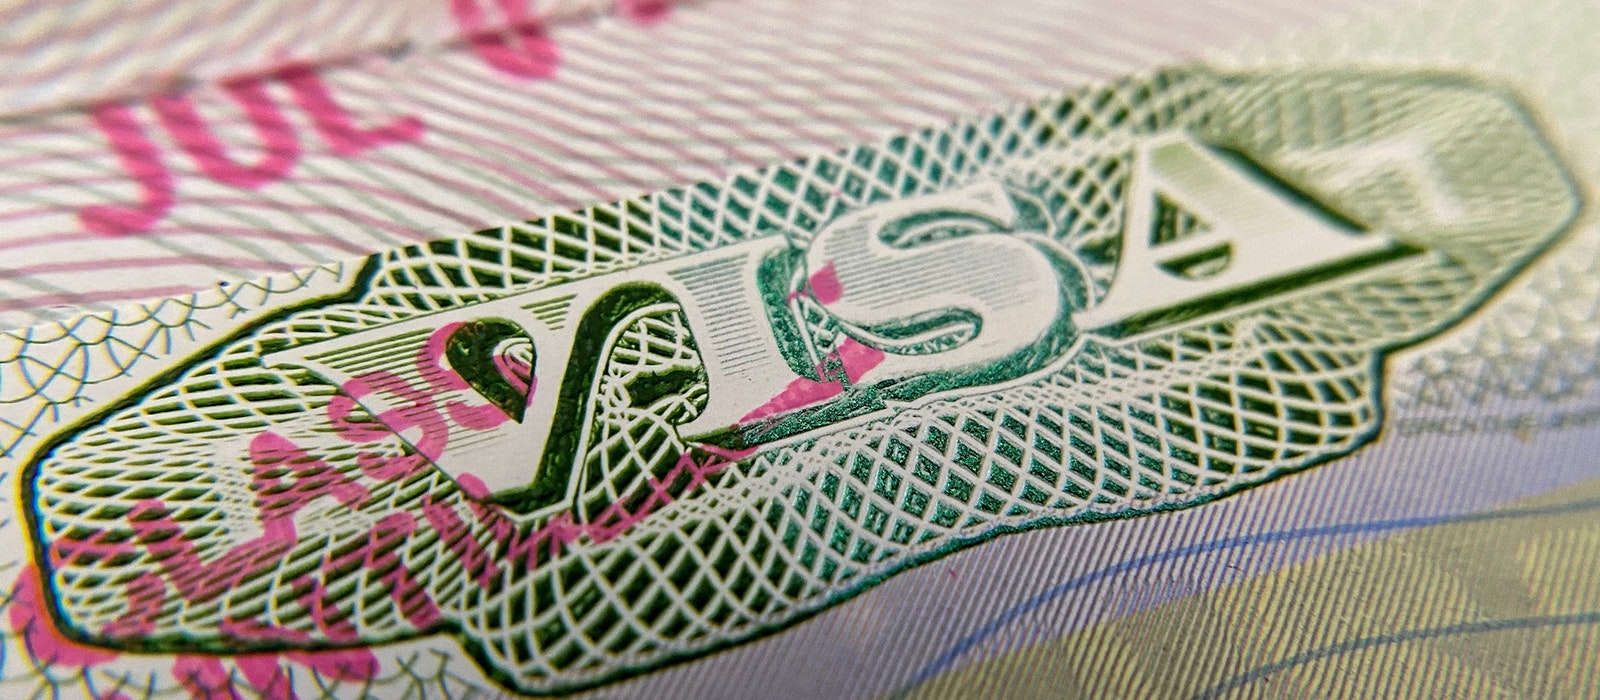 A close-up image of an immigration visa stamped to a foreign passport.